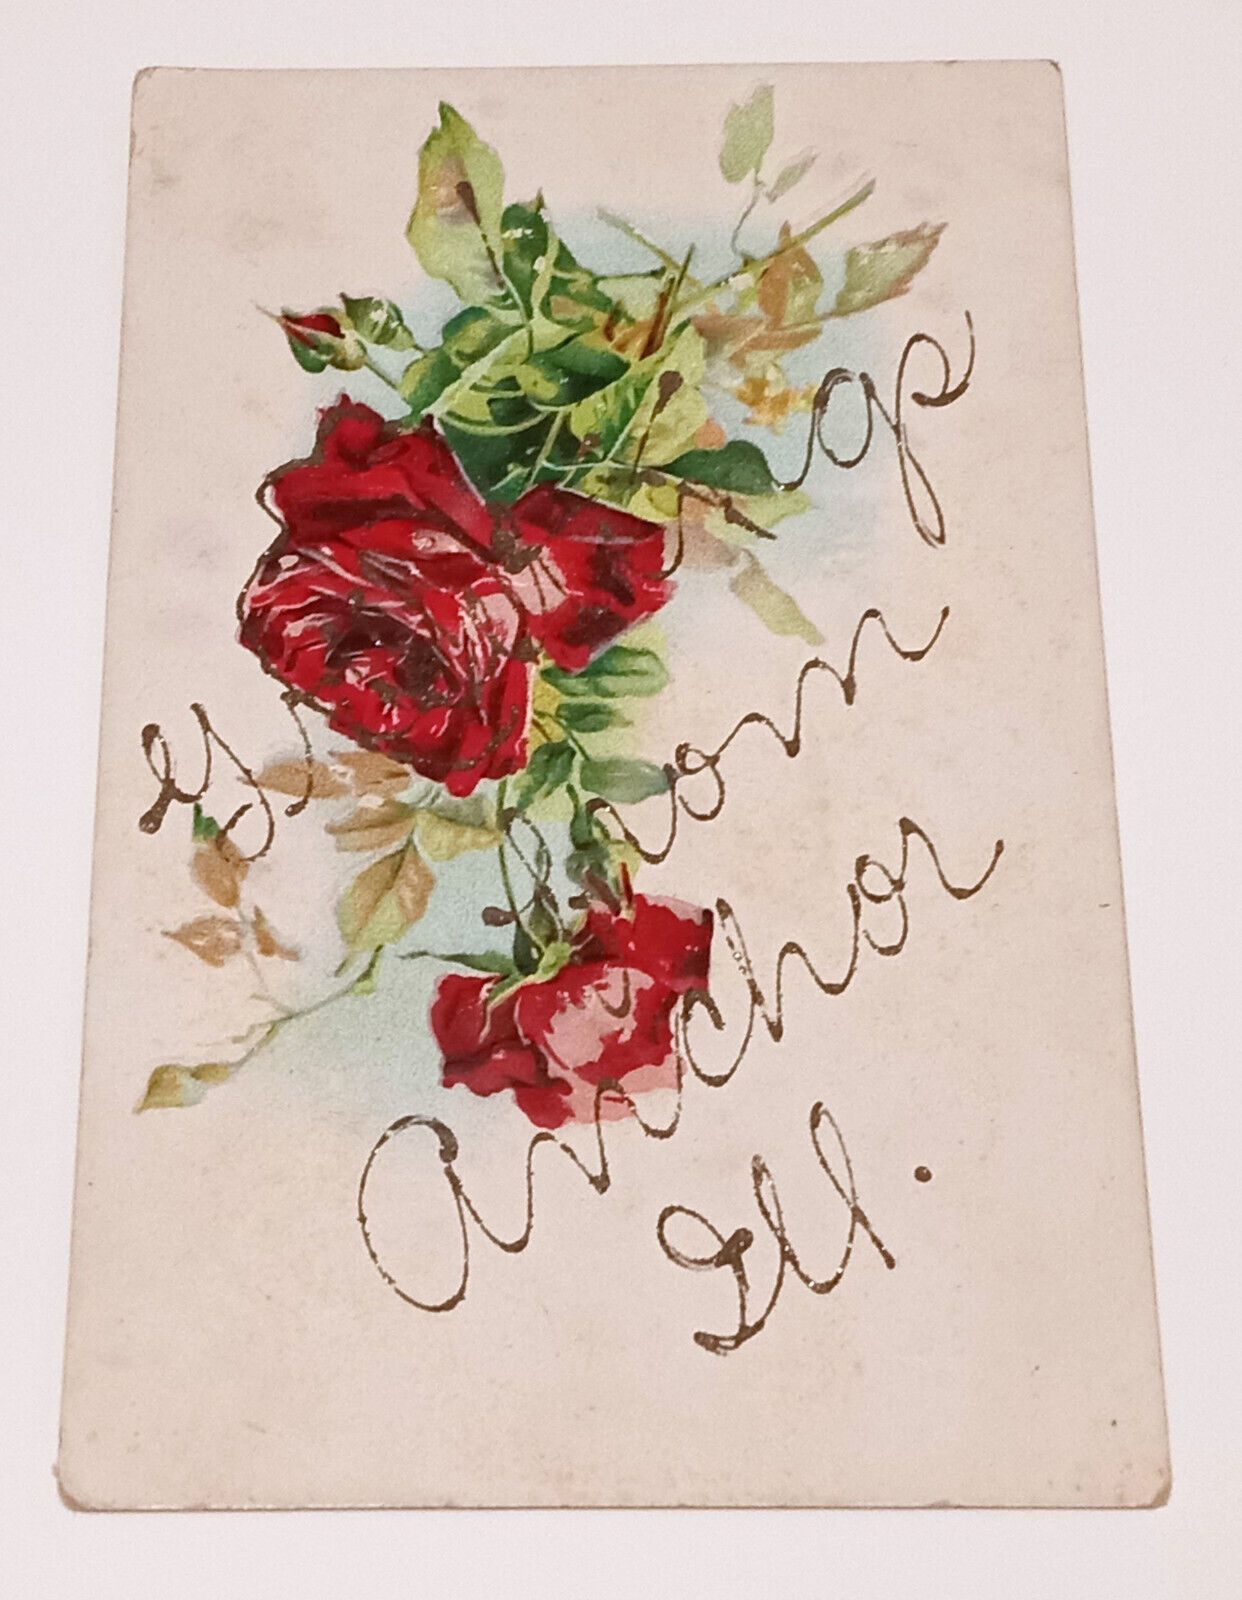 Anchor Illinois IL Greeting Postcard Glitter Writing Rose Flowers